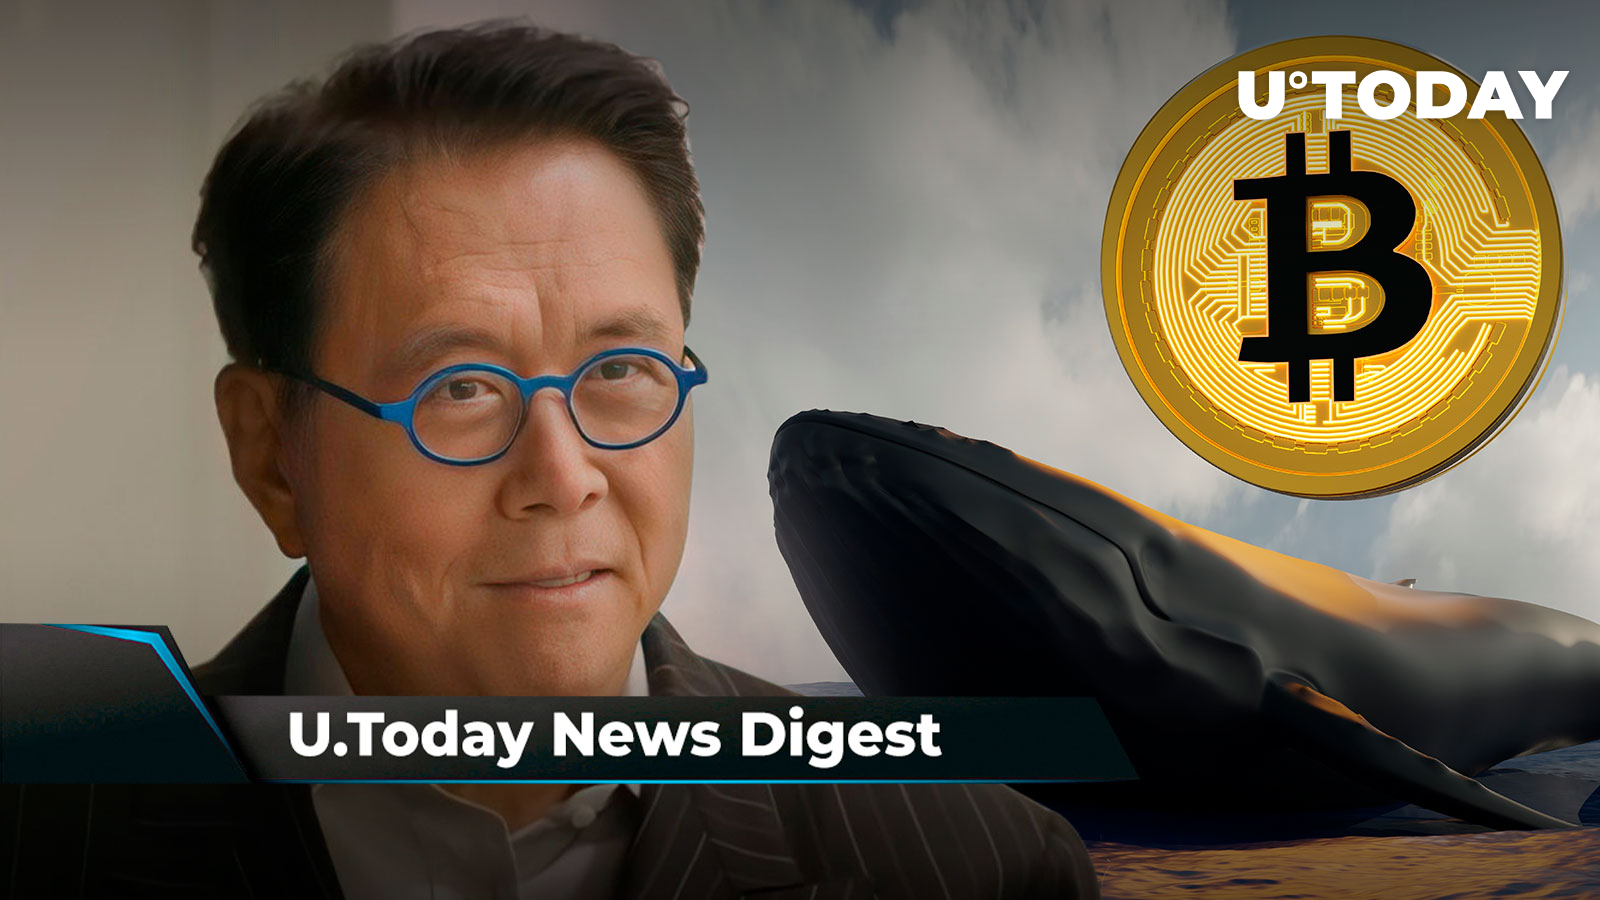 SHIB to Get Greater Use in UAE, Ancient BTC Whales Are Awakening, Robert Kiyosaki Says Market Crash He Foretold in 2013 Is Here: Crypto News Digest by U.Today